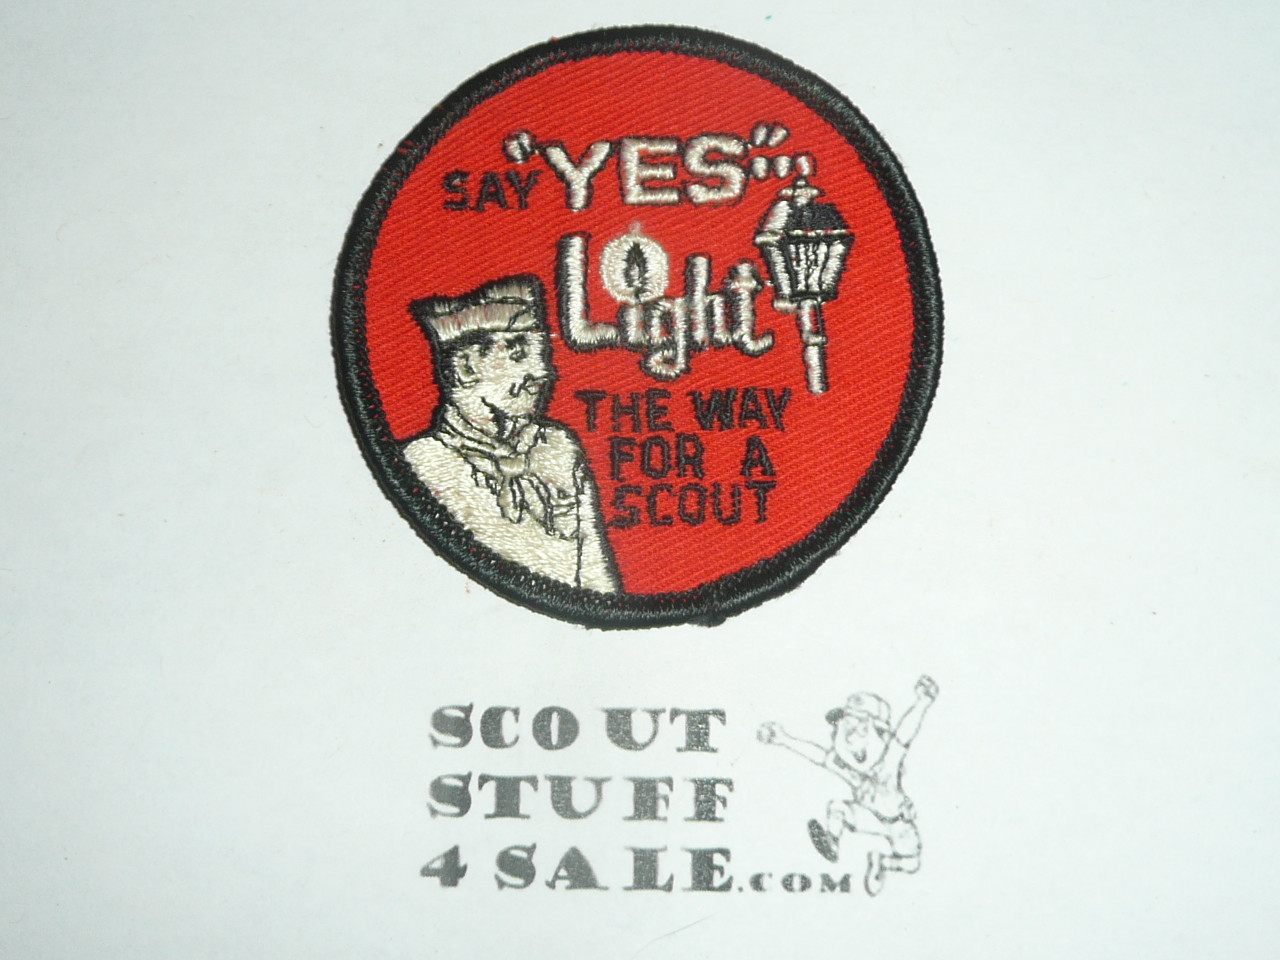 Say Yes Light the way for a Scout, BSA Theme Patch